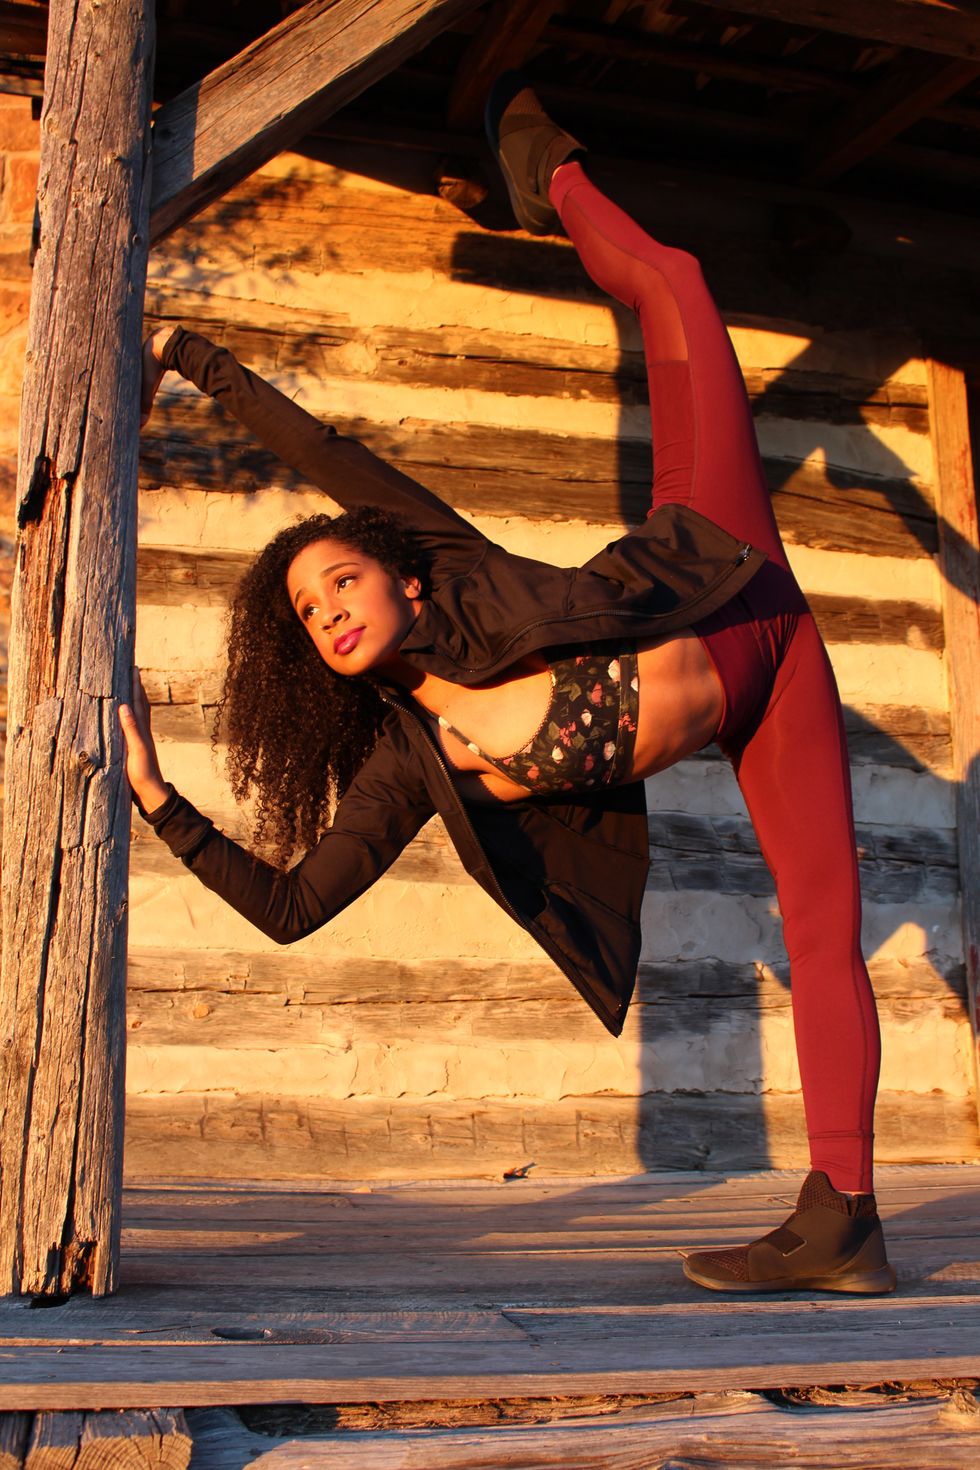 Moore in a penchu00e9, leaning against a support beam of a rustic, wooden building. She is wearing maroon leggings, a floral crop top and a black jacket.